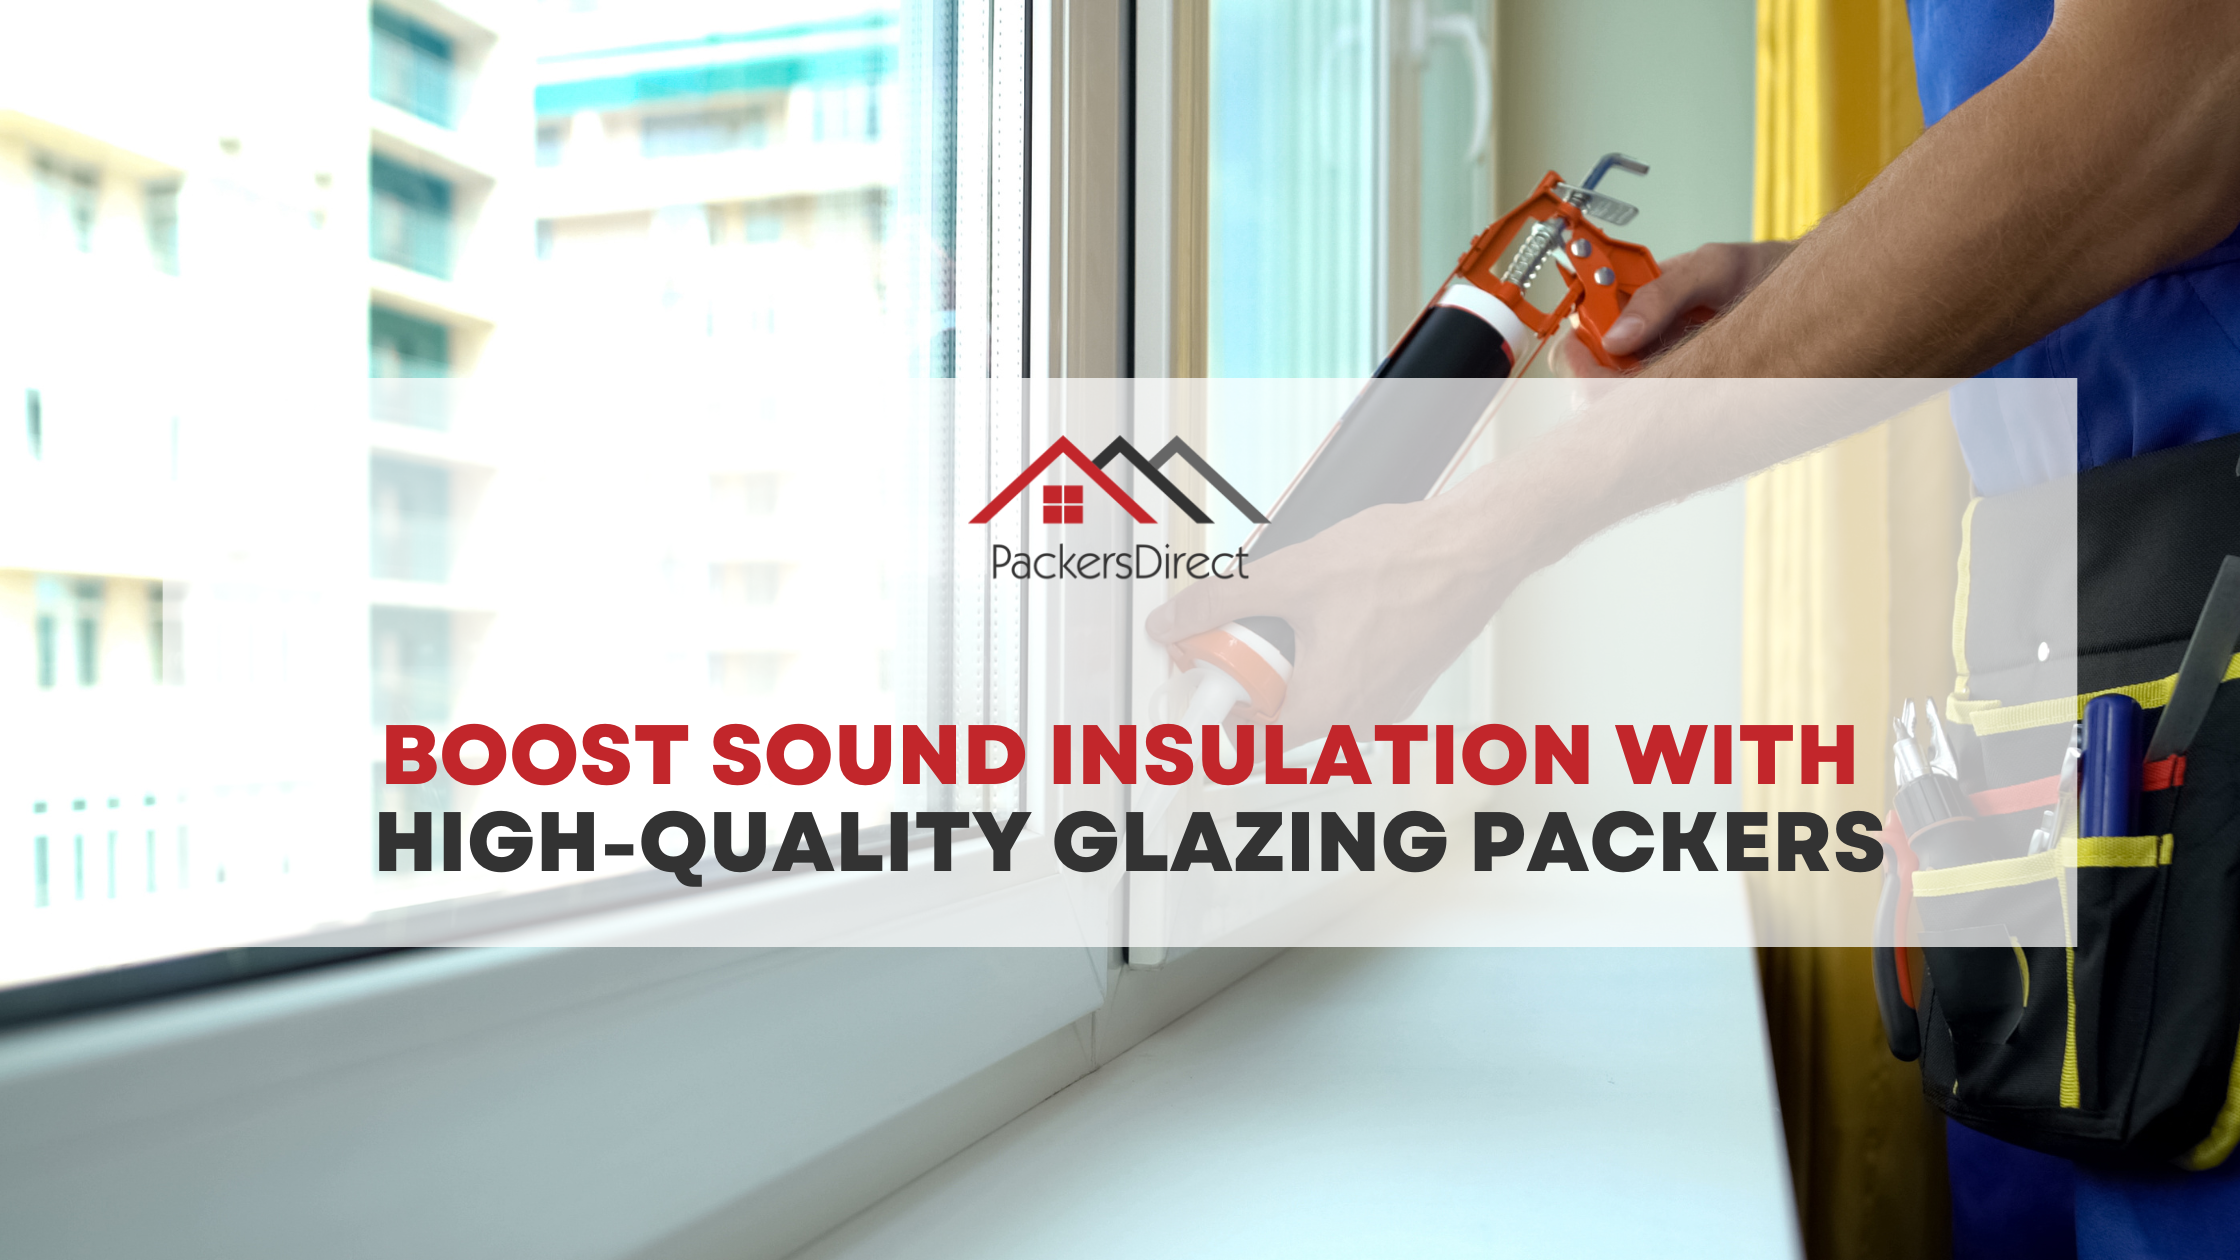 Boost Sound Insulation with High-Quality Glazing Packers